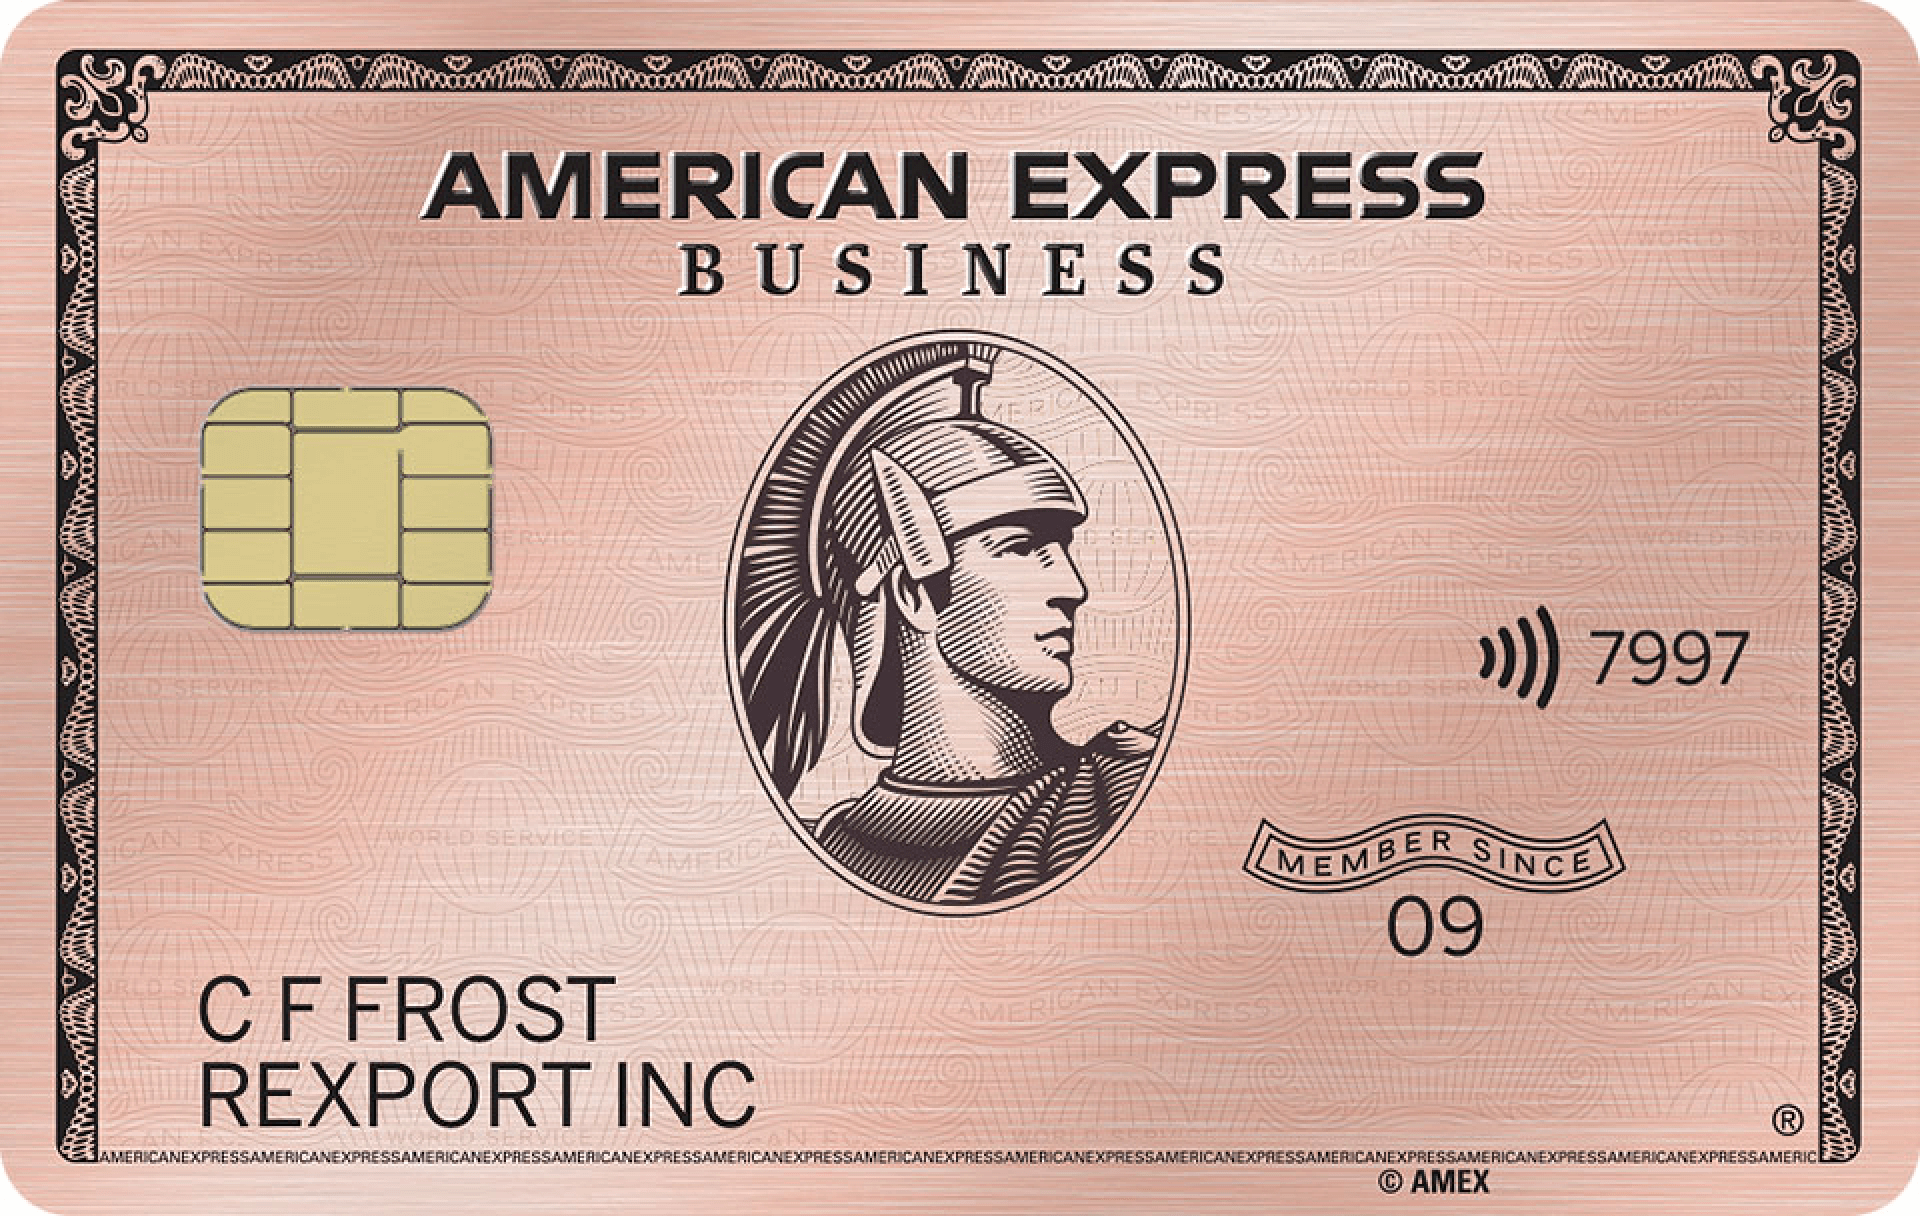 credit card art for: Amex Business Rose Gold Card